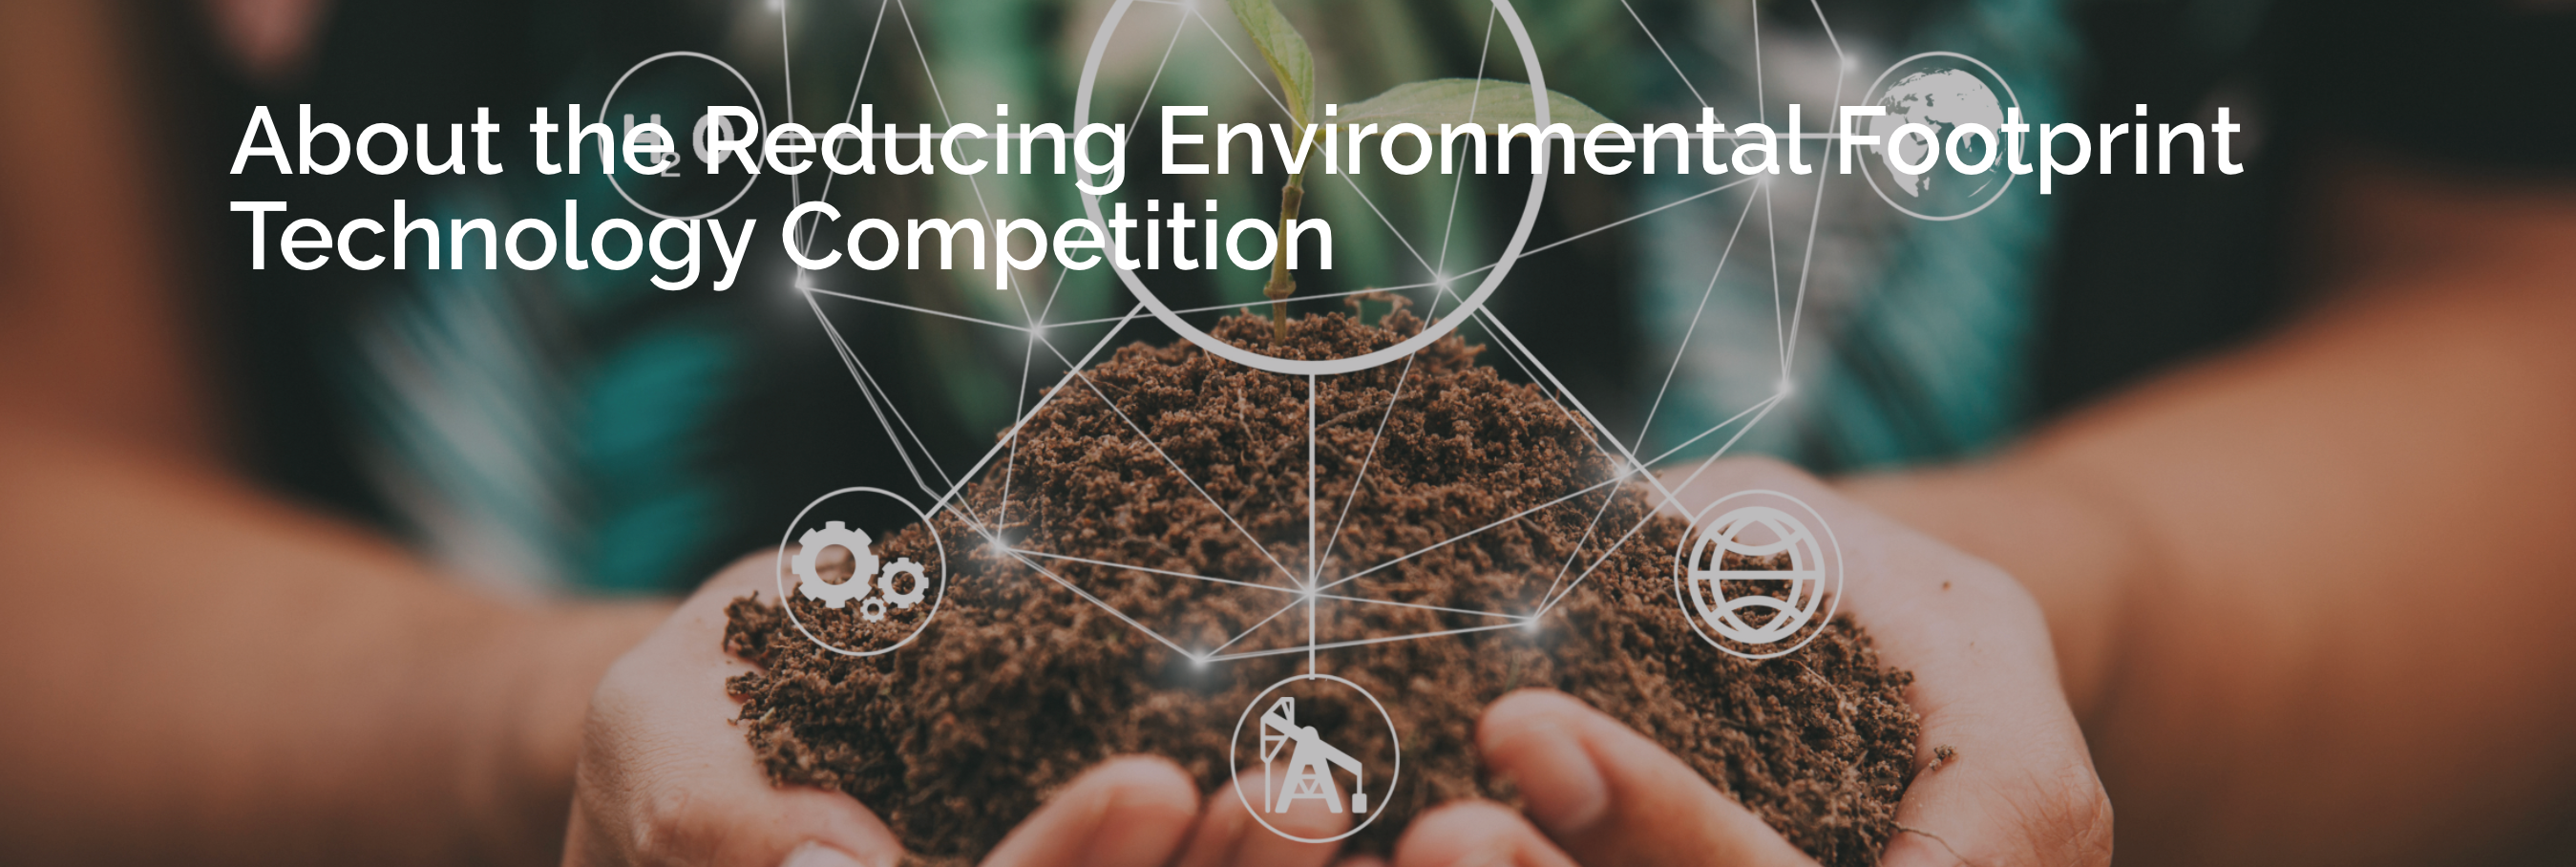 Reducing Environmental Footprint Technology Competition